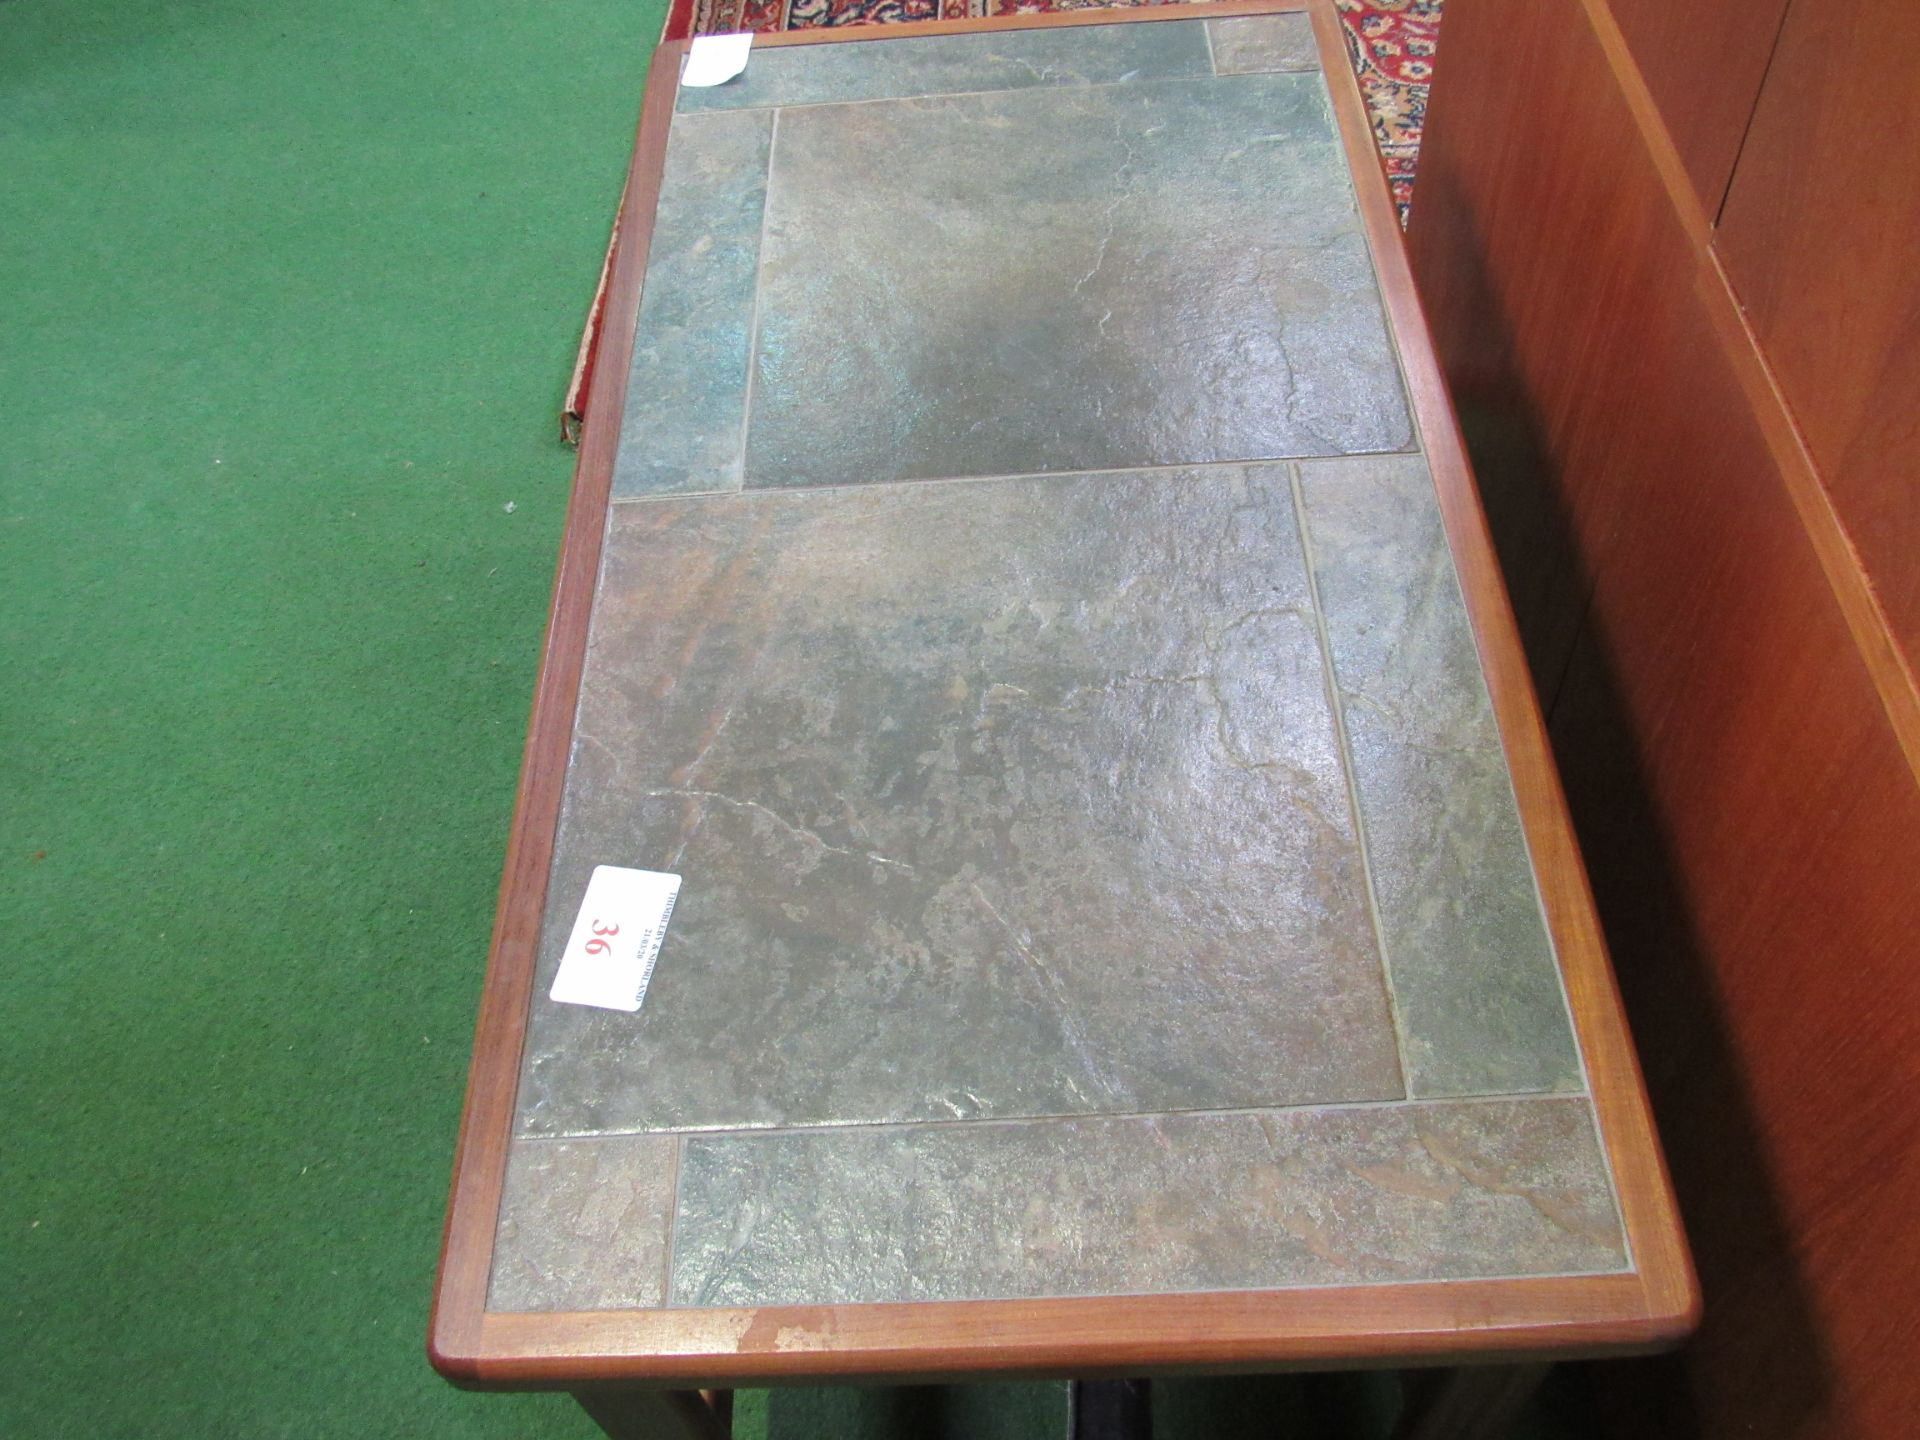 Teak tile-top coffee table by Anbercraft of Stoke-on-Trent, 85 x 44 x 39cms. Estimate £20-30. - Image 4 of 4